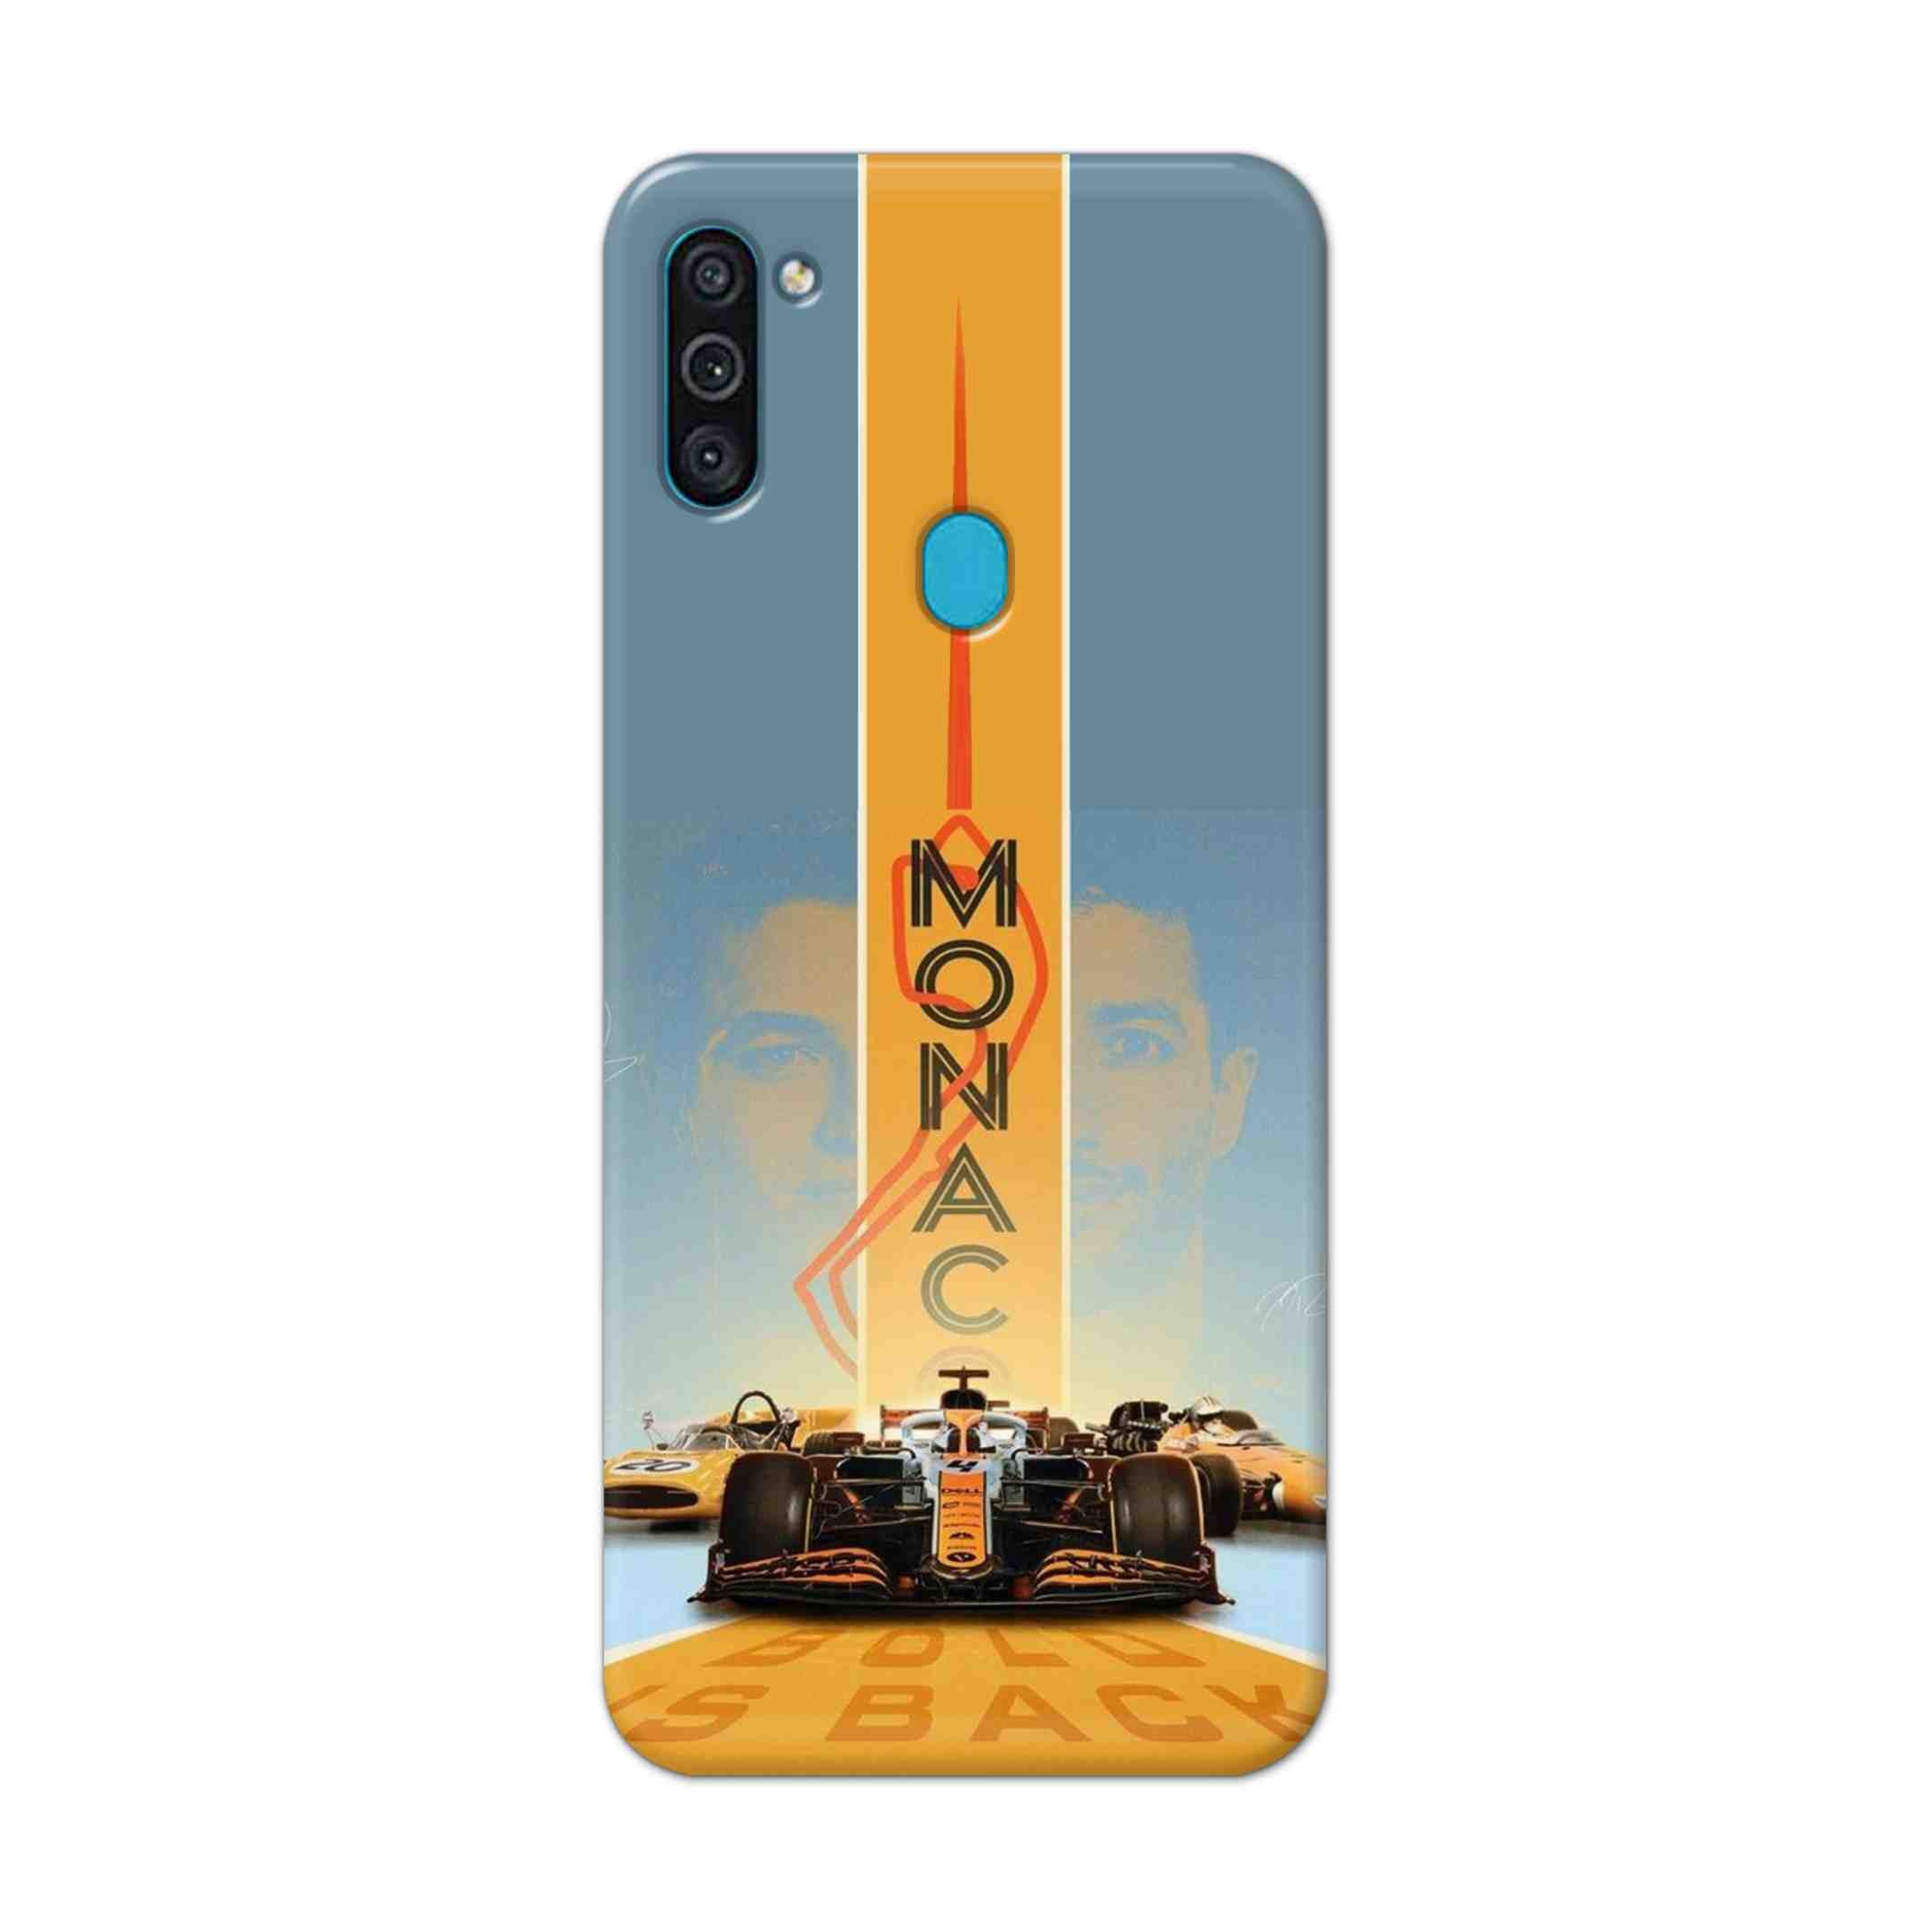 Buy Monac Formula Hard Back Mobile Phone Case Cover For Samsung Galaxy M11 Online